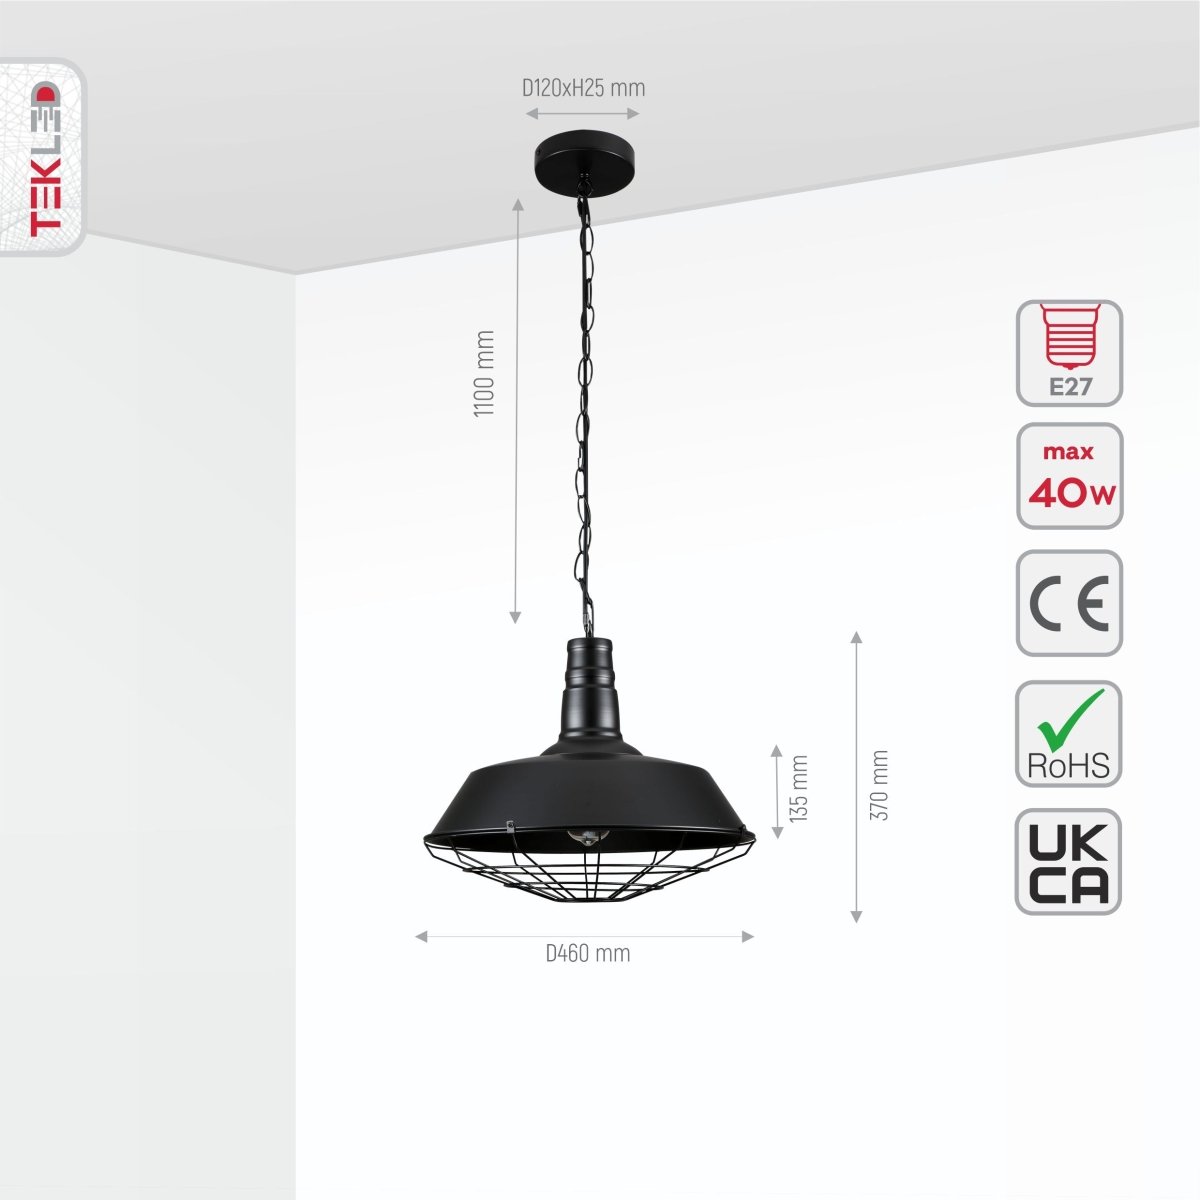 Size and specs of Black Step Caged Industrial Metal Ceiling Pendant Light with E27 Fitting | TEKLED 150-18362